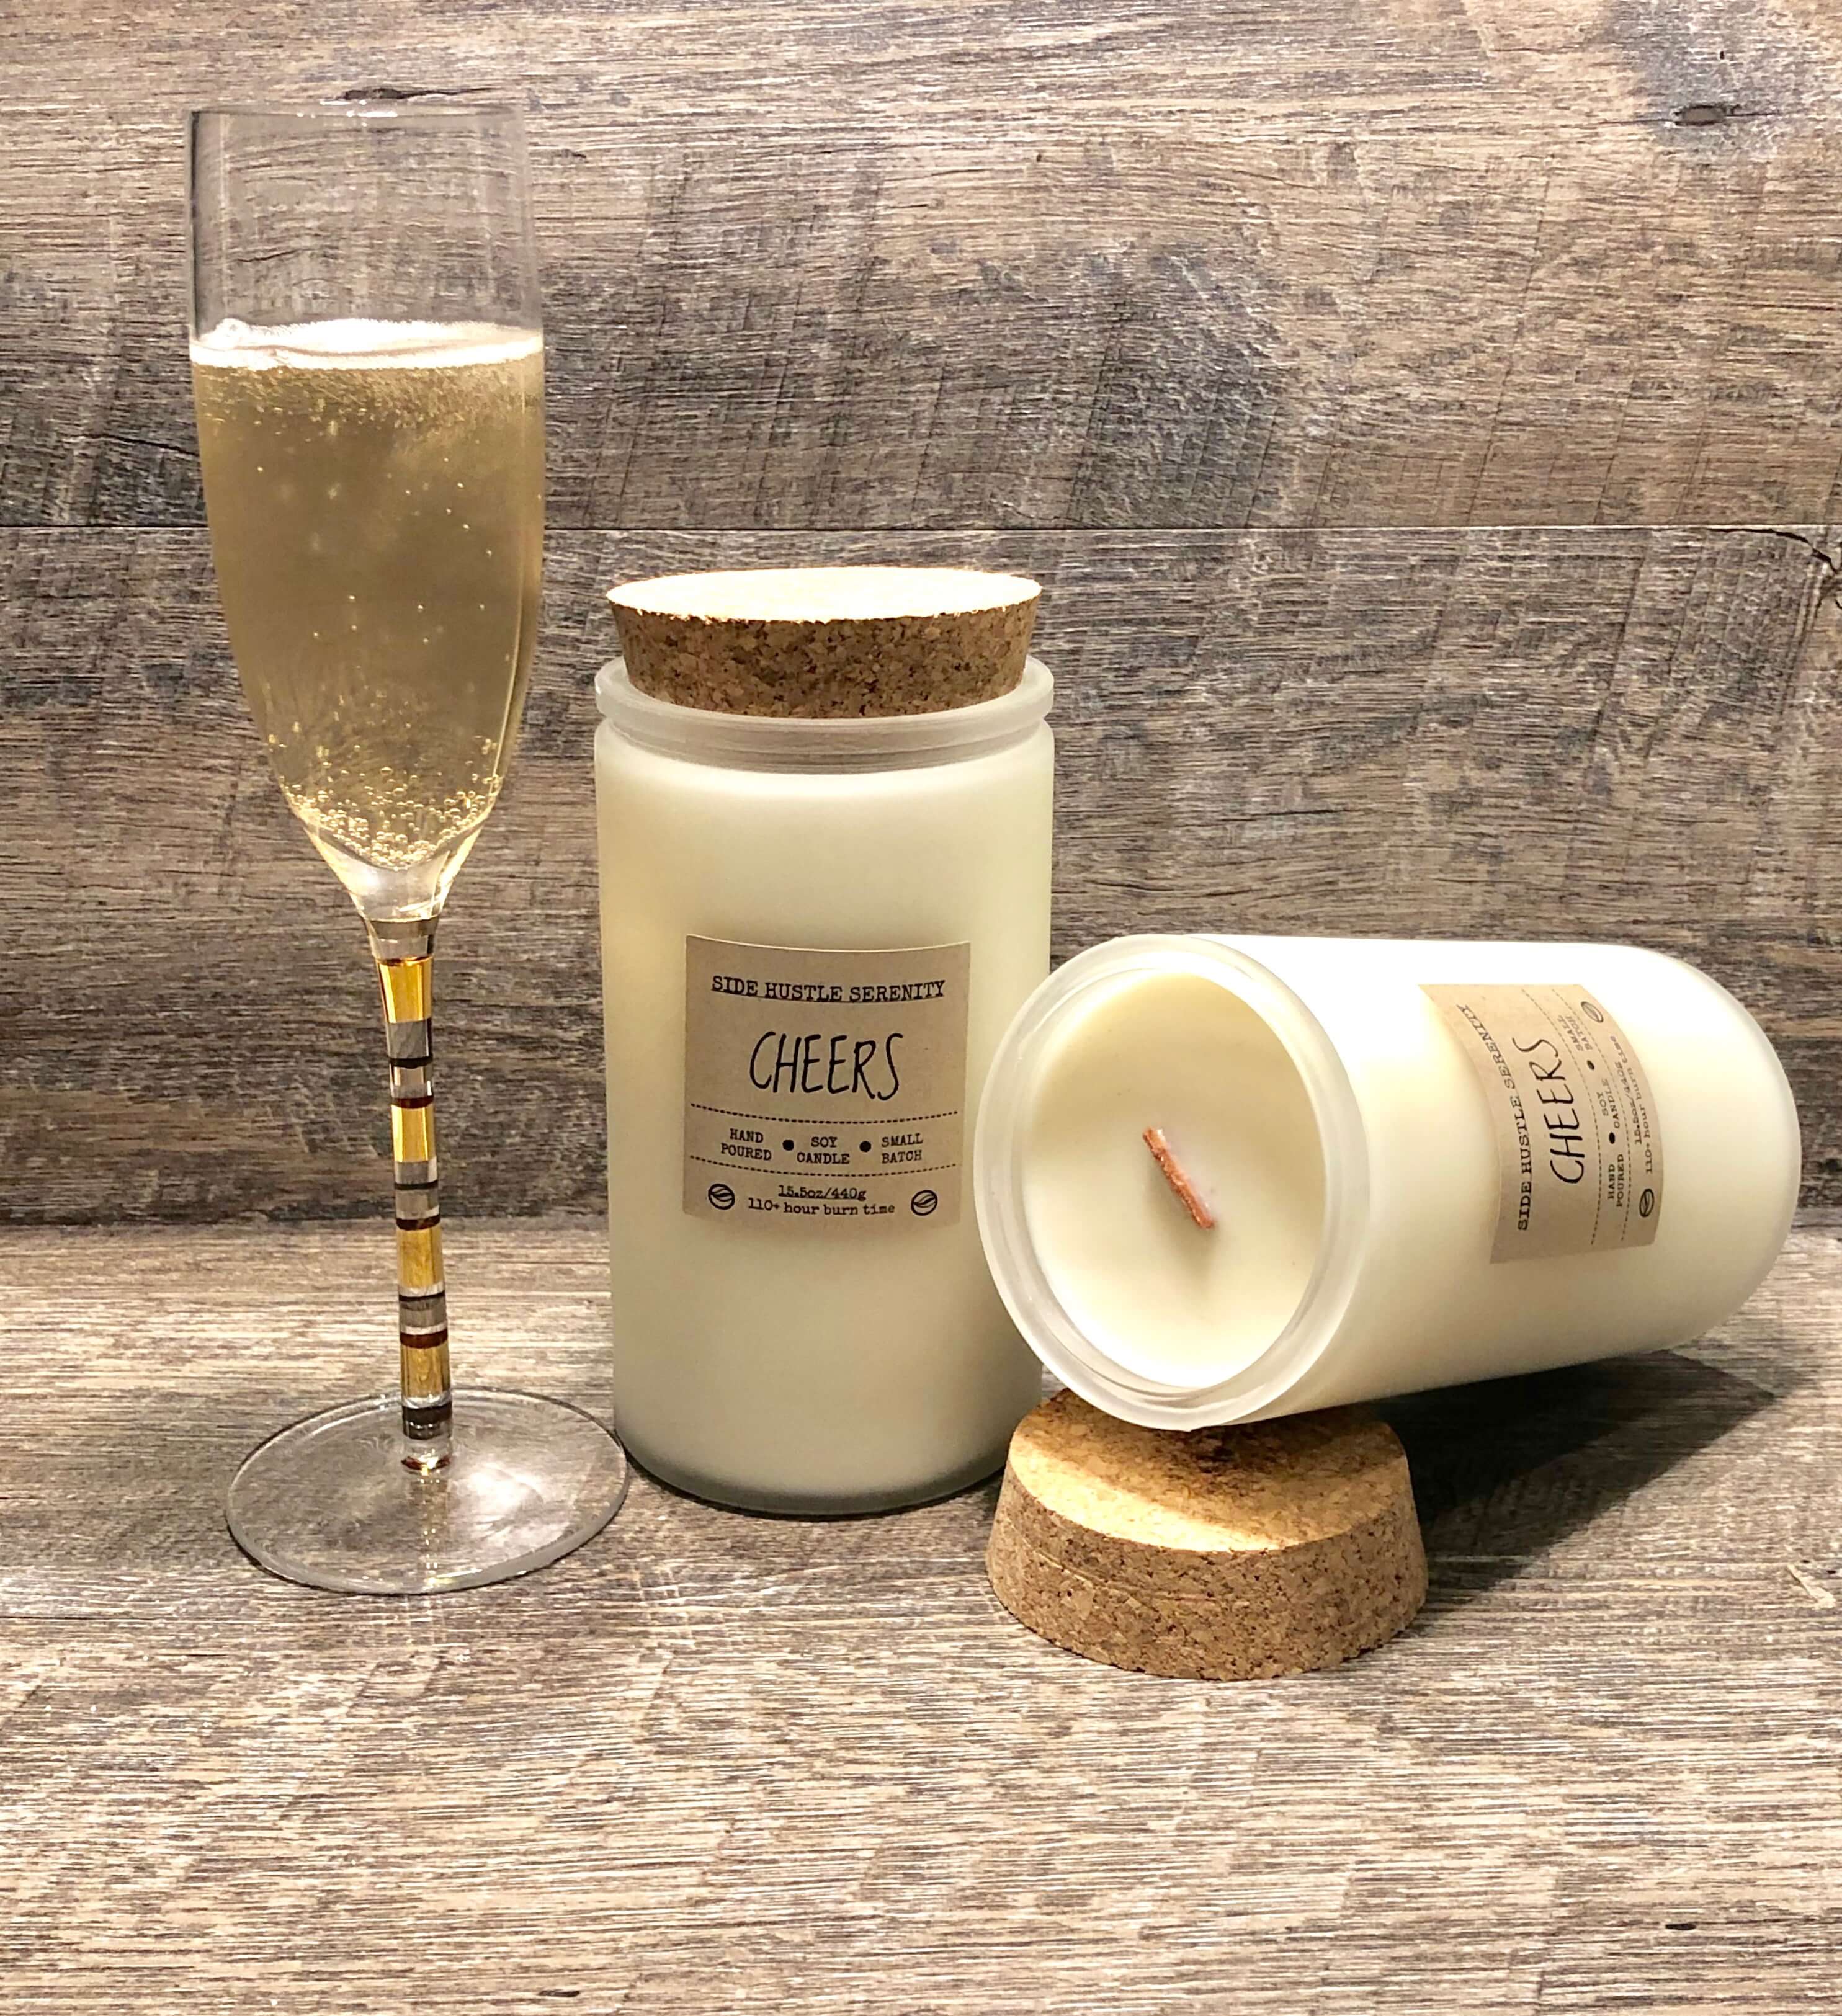 ULTIMATE GIFT SET | CHEERS "Champagne" Scented - Side Hustle Serenity